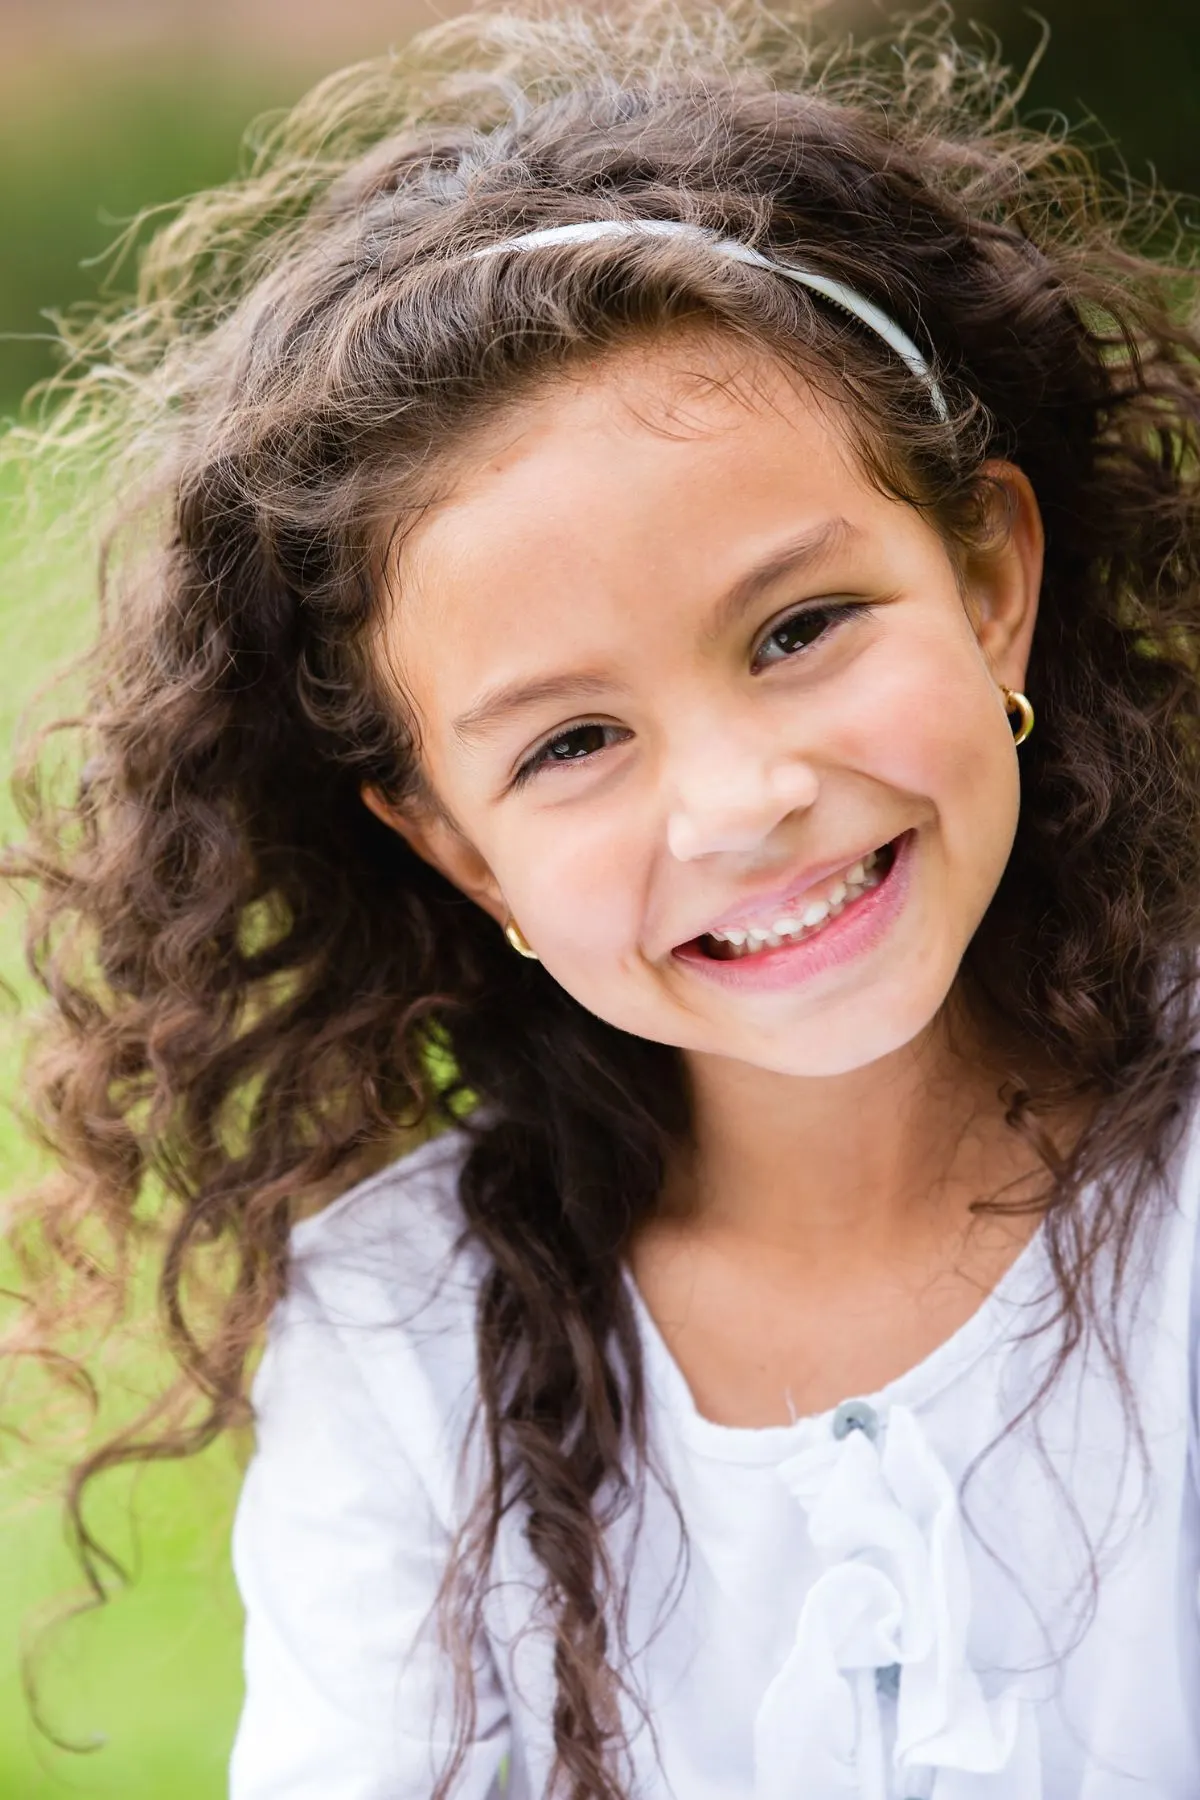 Smiling girl with big curly hair and white headband standing outside.